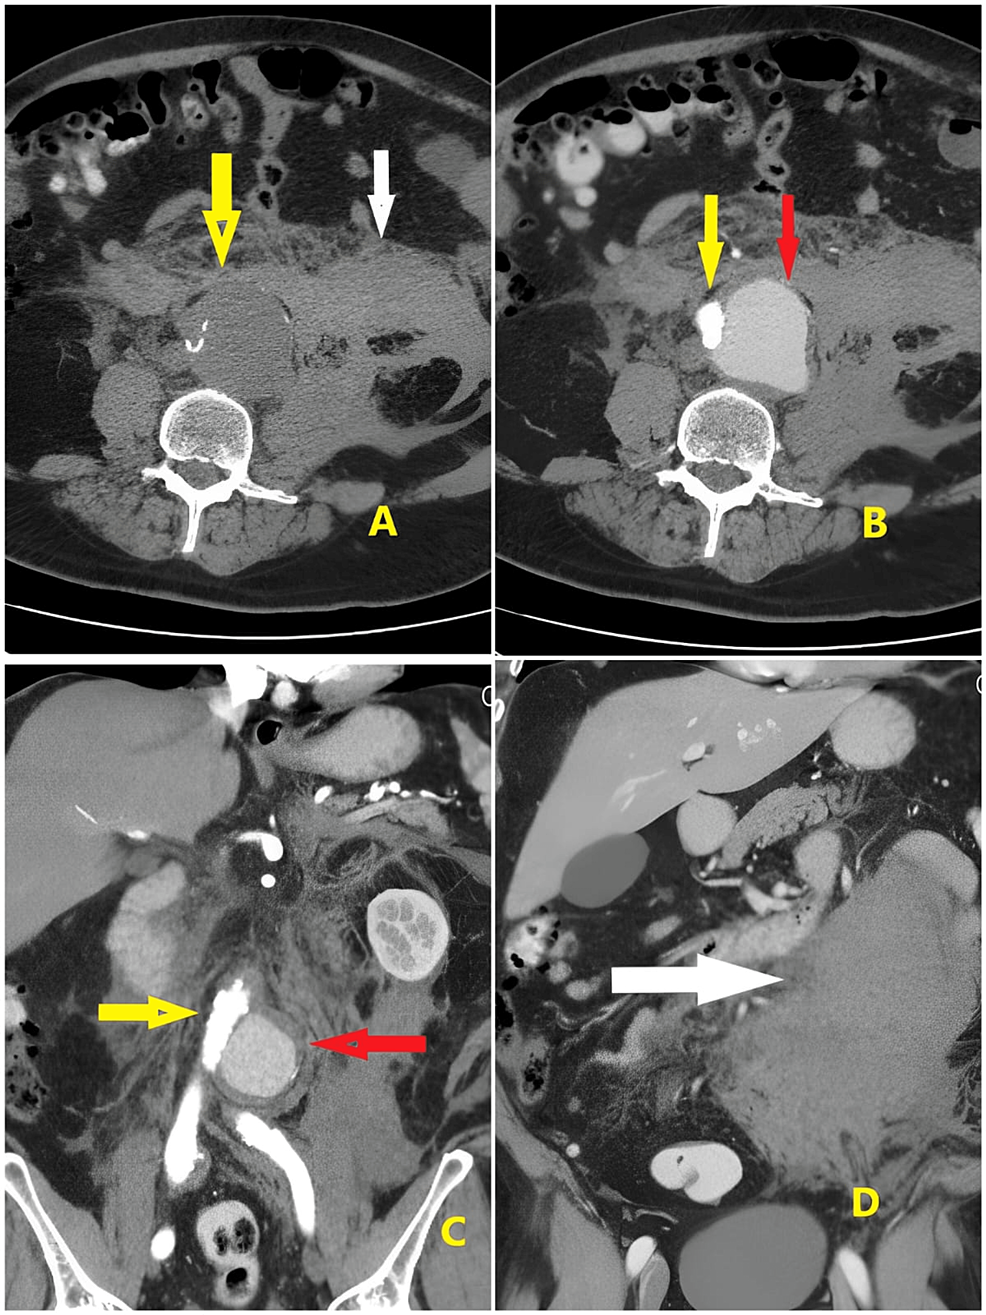 (A)-Plain-CT-of-the-aorta-without-contrast-(yellow-arrow)-and-surrounding-hematoma-(white-arrow),-(B-and-C)-the-true-lumen-(yellow-arrow)-and-the-false-lumen-(red-arrow),-and-(D)-a-huge-retroperitoneal-hematoma-(white-arrow)